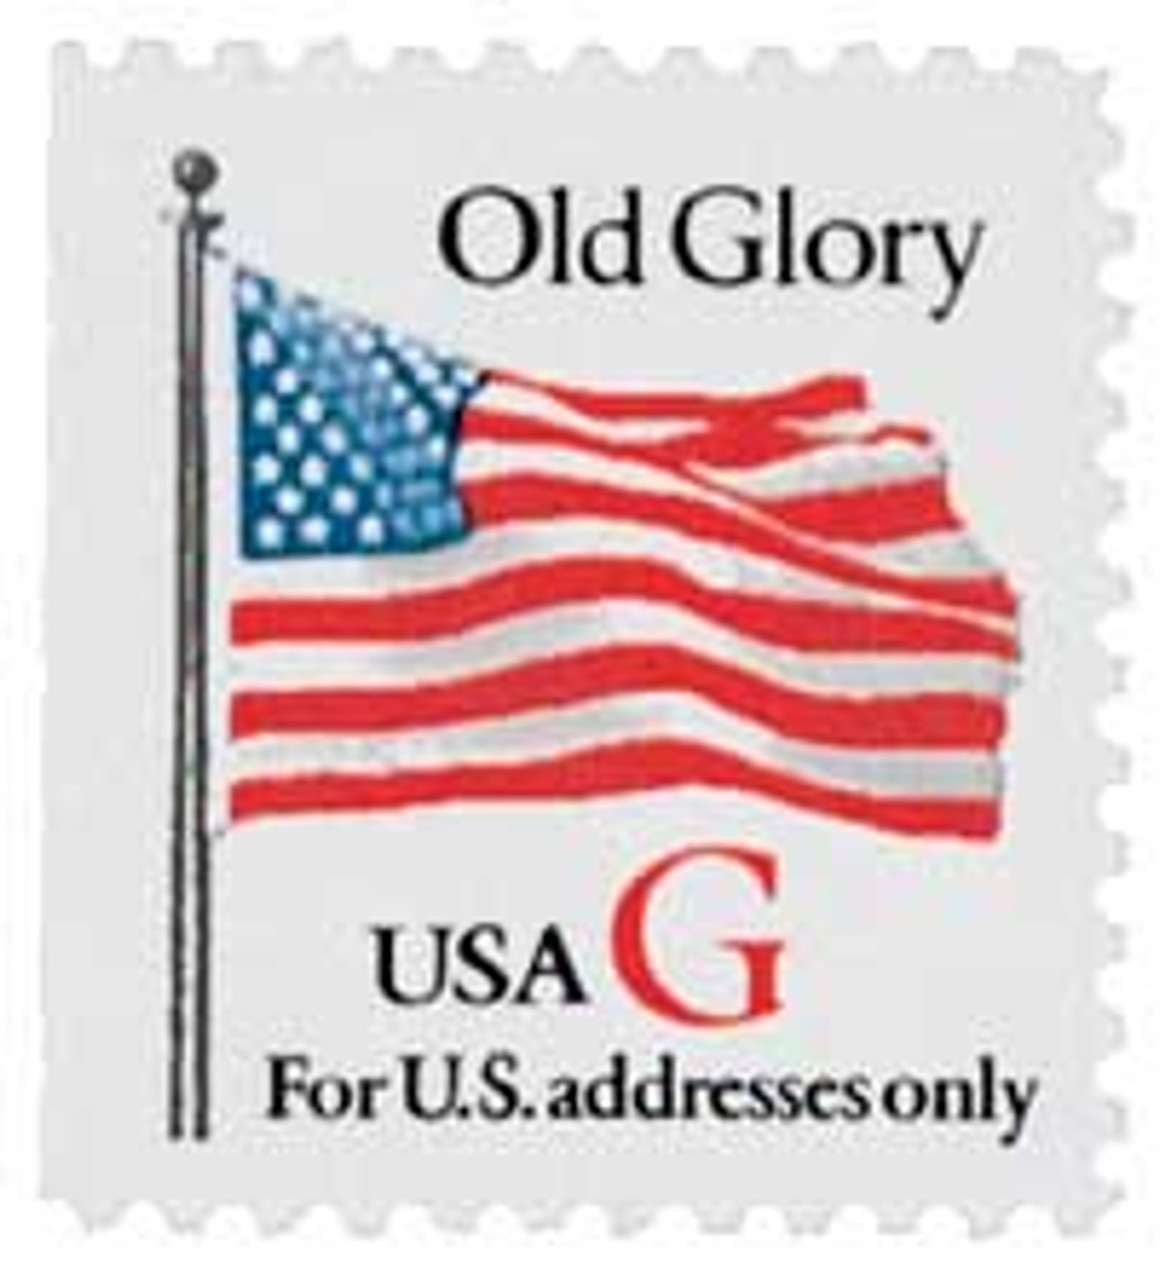 T&G STAMPS - US Postage Collection - 25 Vintage Stamps 70-90 Yrs Old B